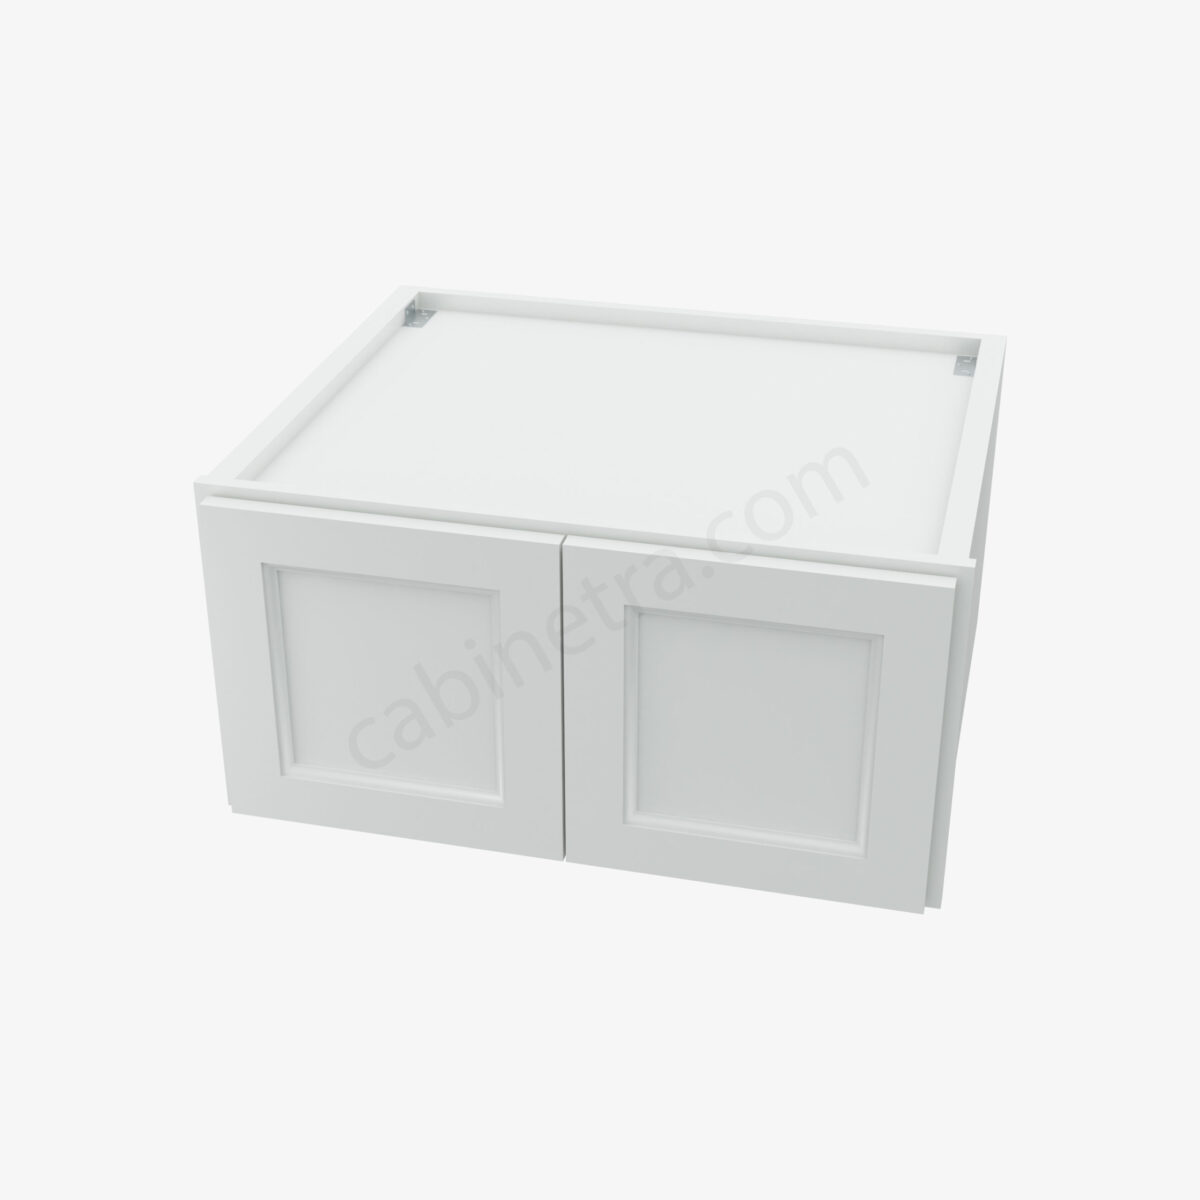 TW W301524B 3 Forevermark Uptown White Cabinetra scaled